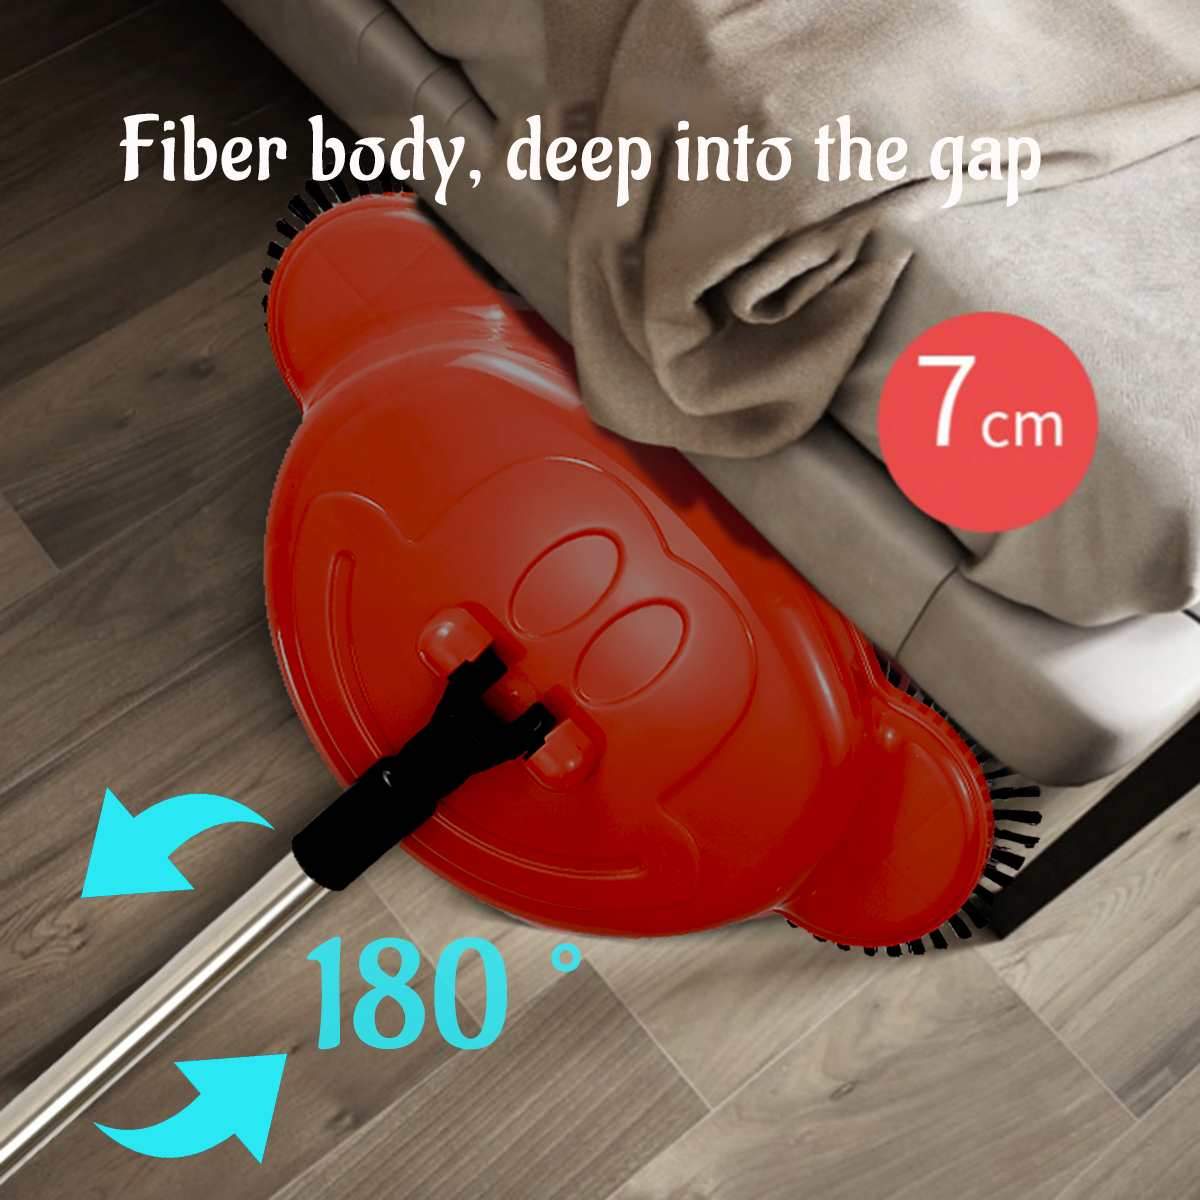 Stainless Steel Hand Sweeper Push Type Sweeping Machine Without Electricity Dry Wet Use Lazy Household Vacuum Cleaner